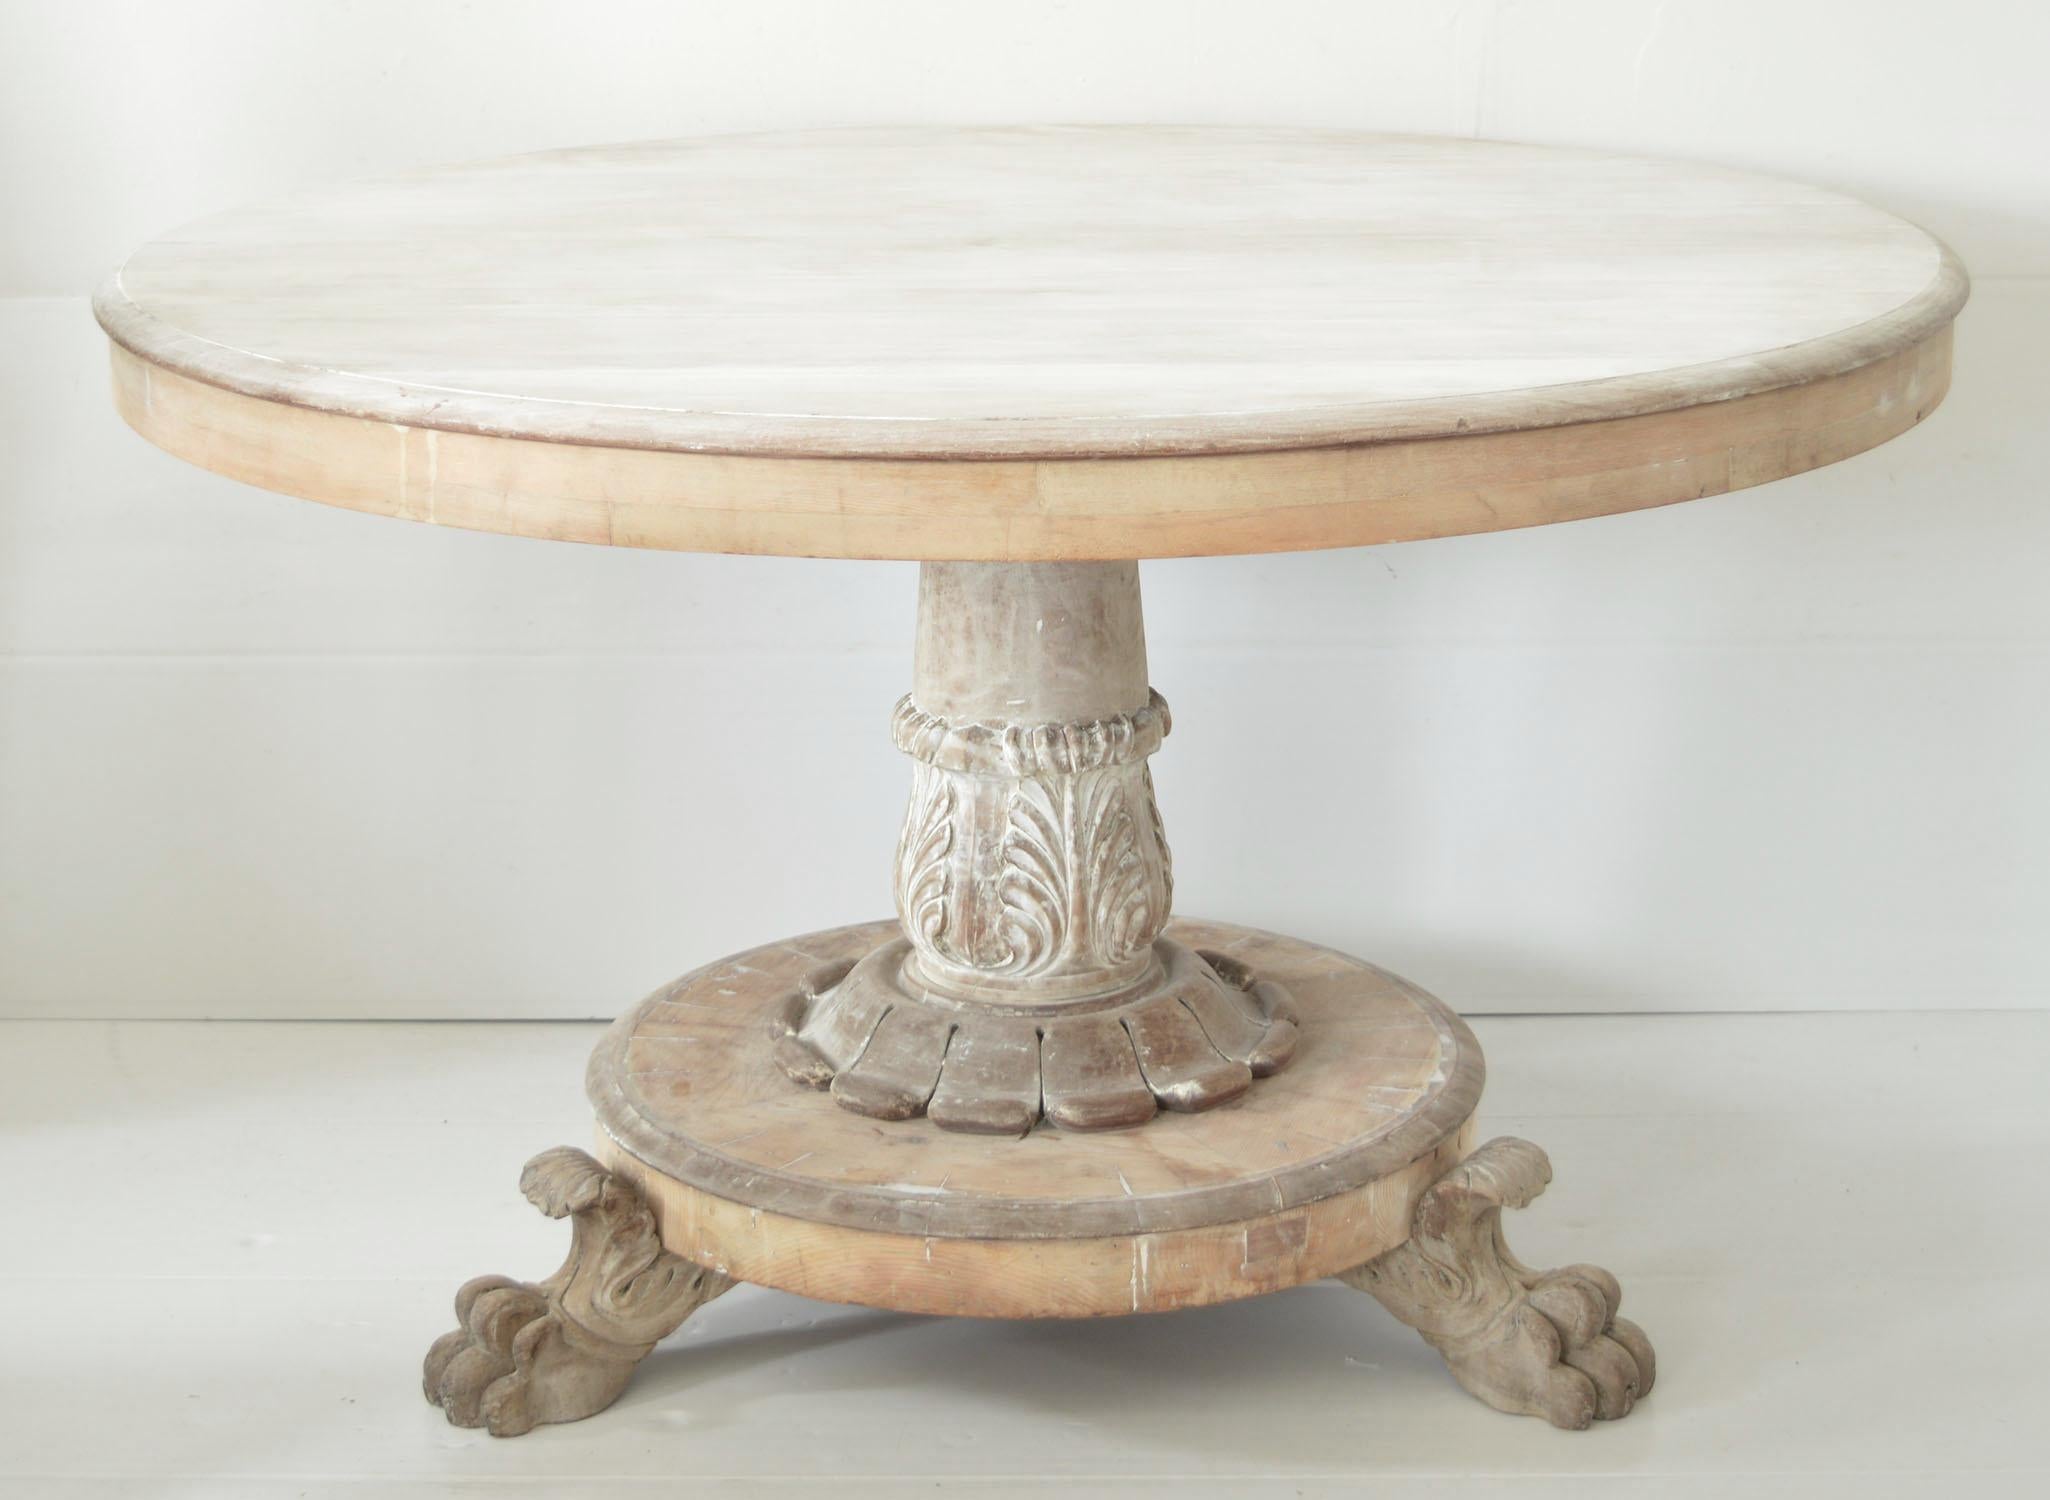 Fabulous bleached round table.

Great distressed look.

I particularly like the carved pedestal support in the classical style.

Bleached Honduras mahogany and pine

I have chosen not to lacquer or wax the table.









    